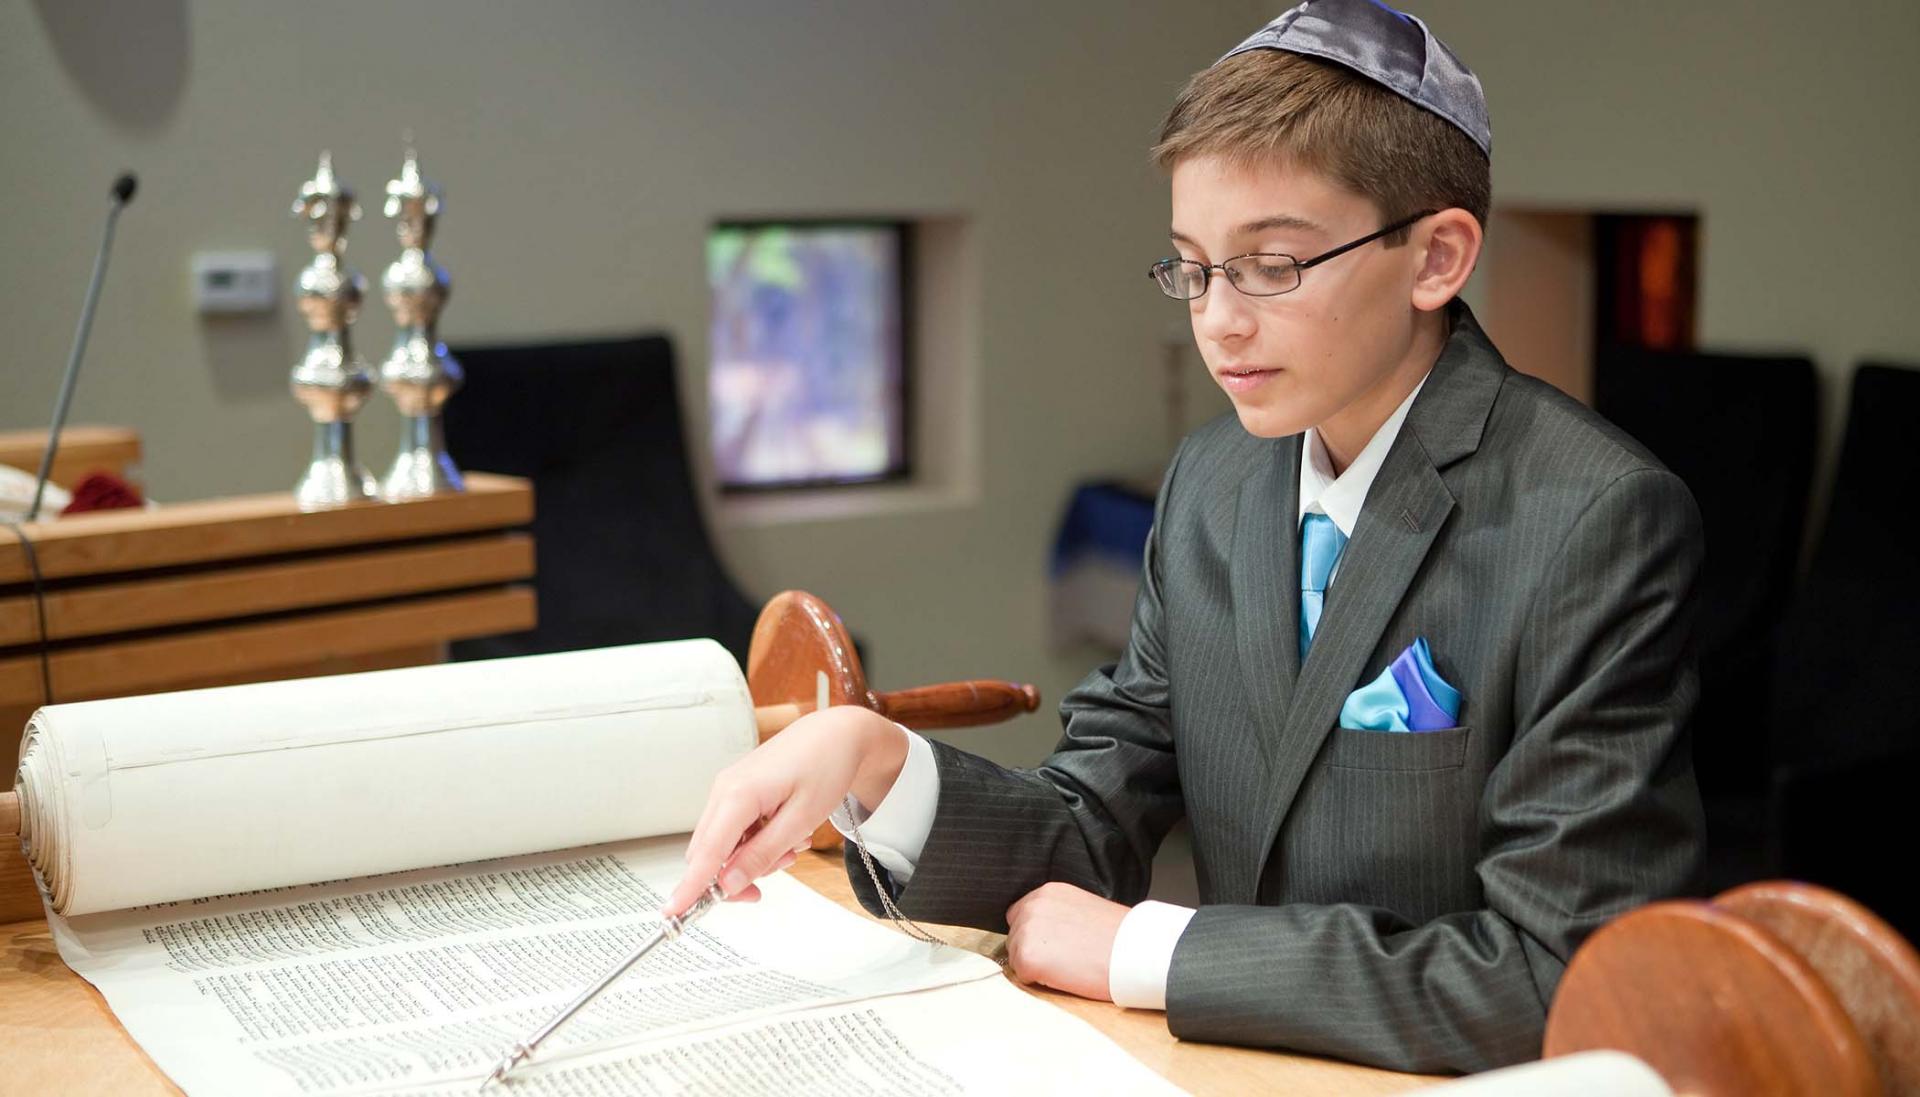 Coppell TX Bar Mitzvah Photography